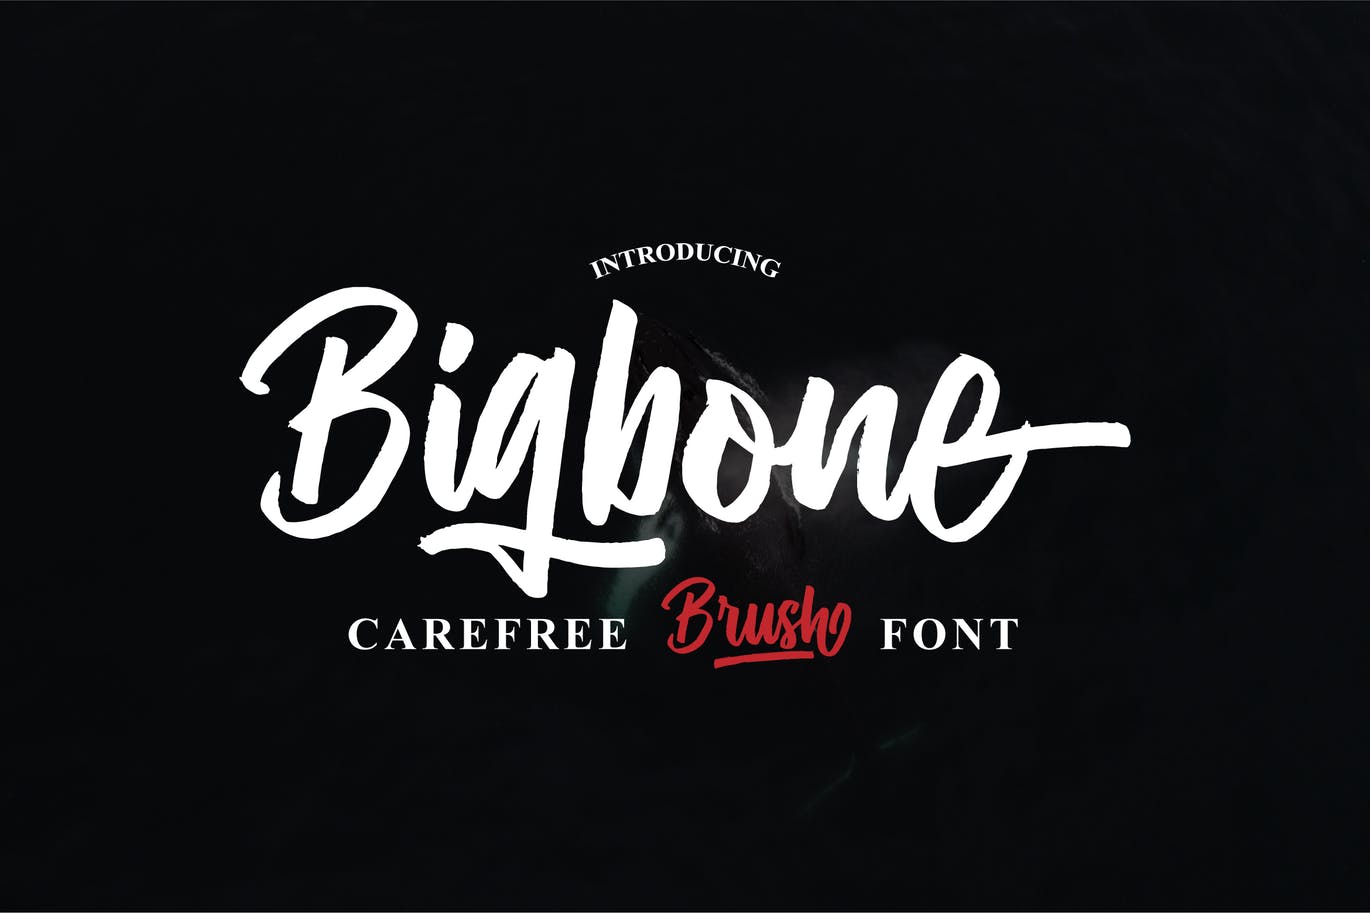 A carefree brush font